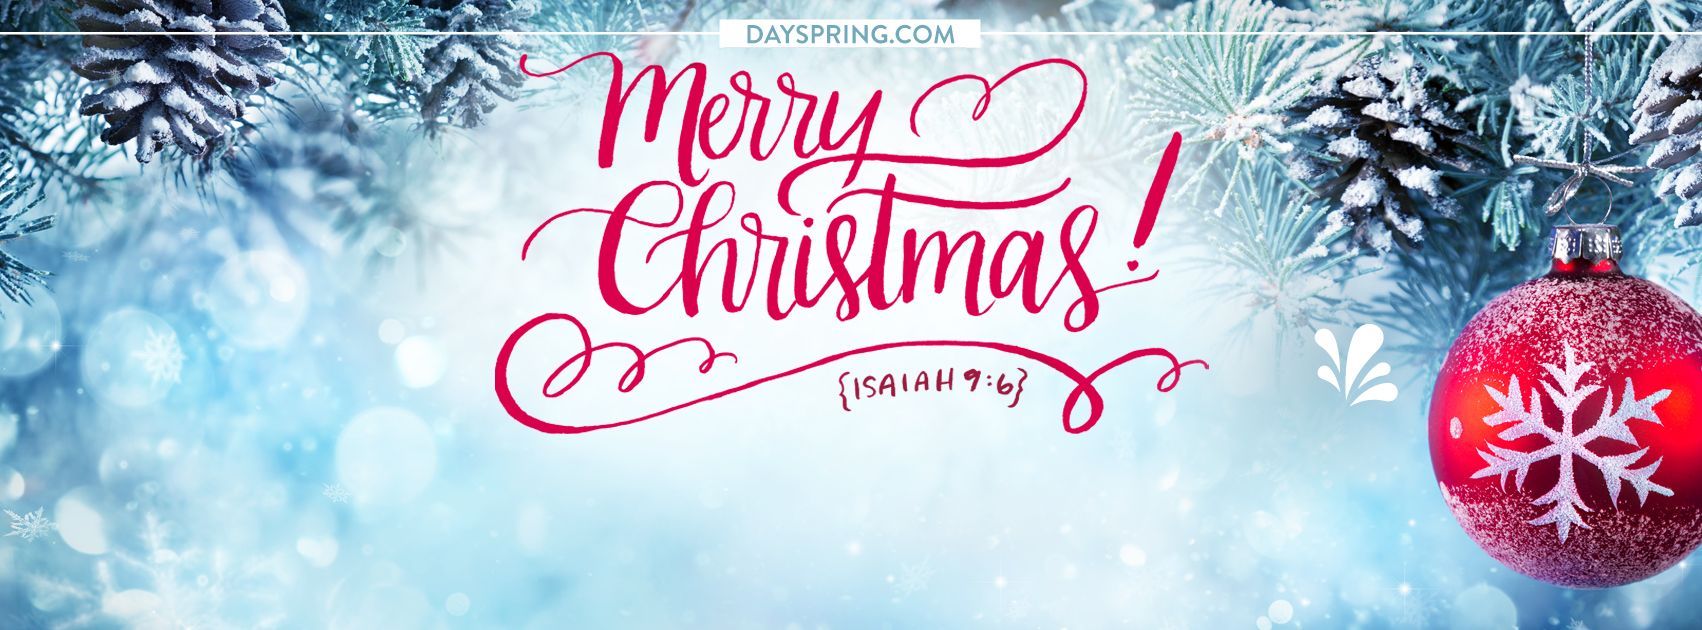 pink christmas facebook covers